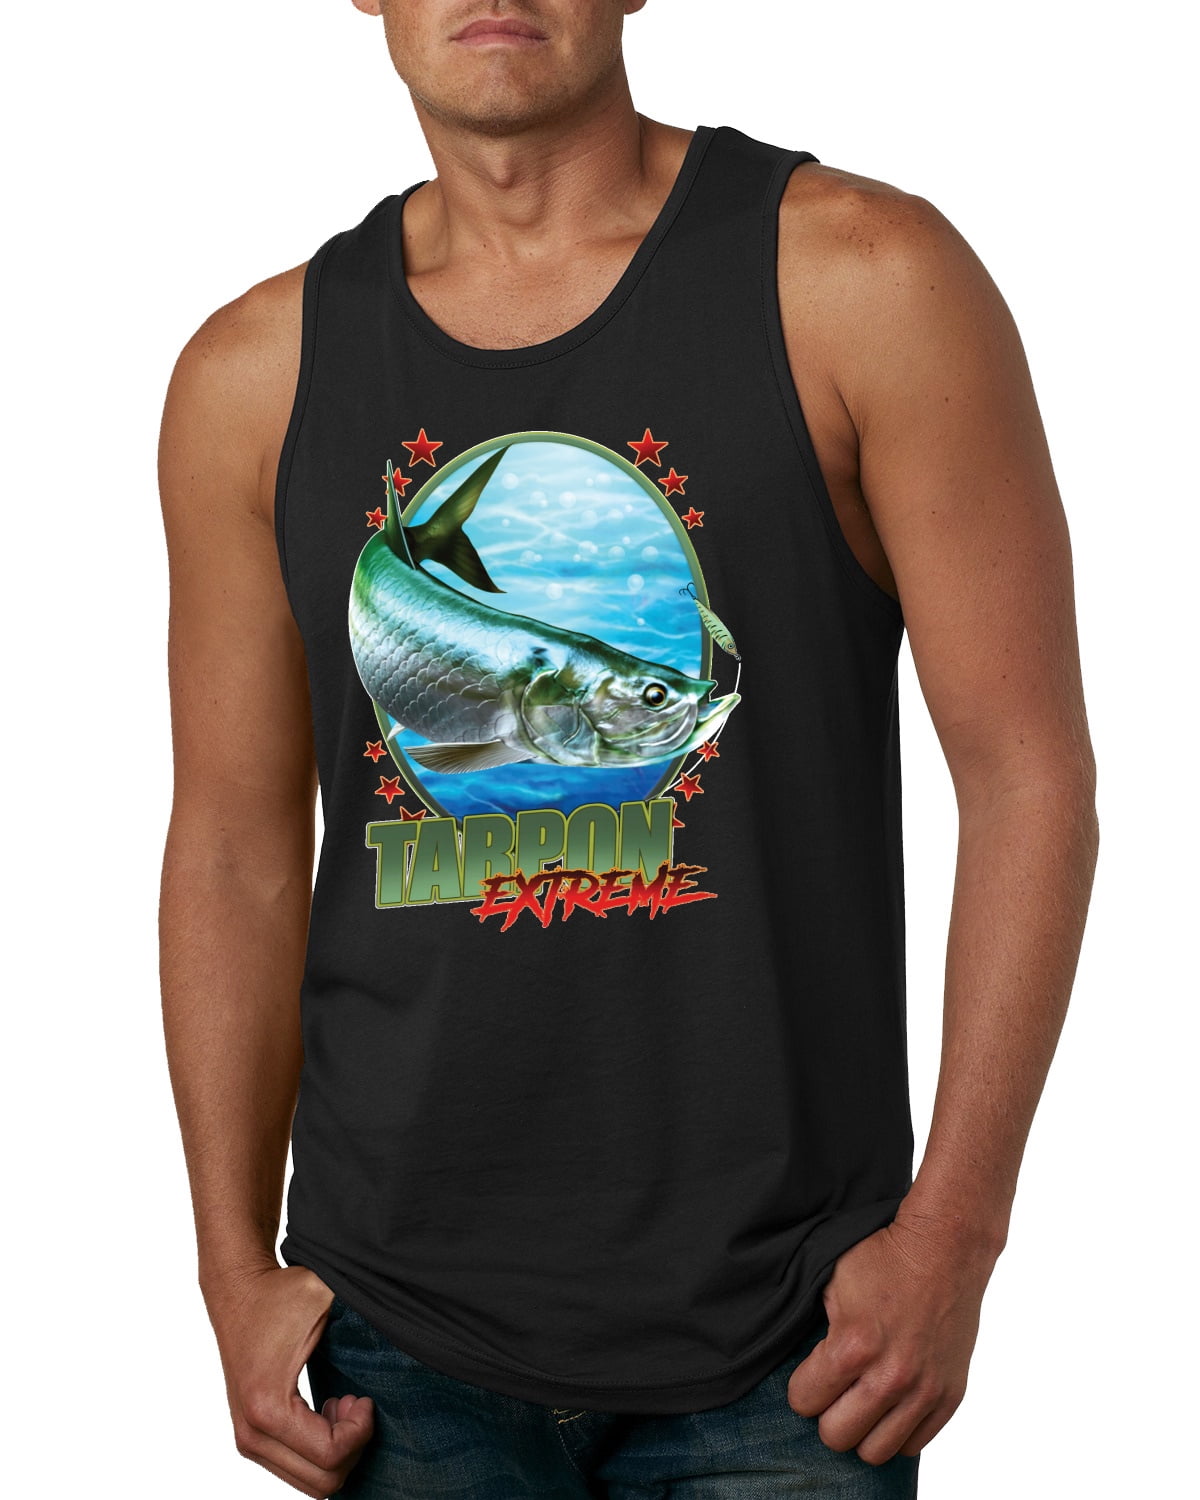 Tarpon Extreme Mens Graphic Tank Top, Red, Small